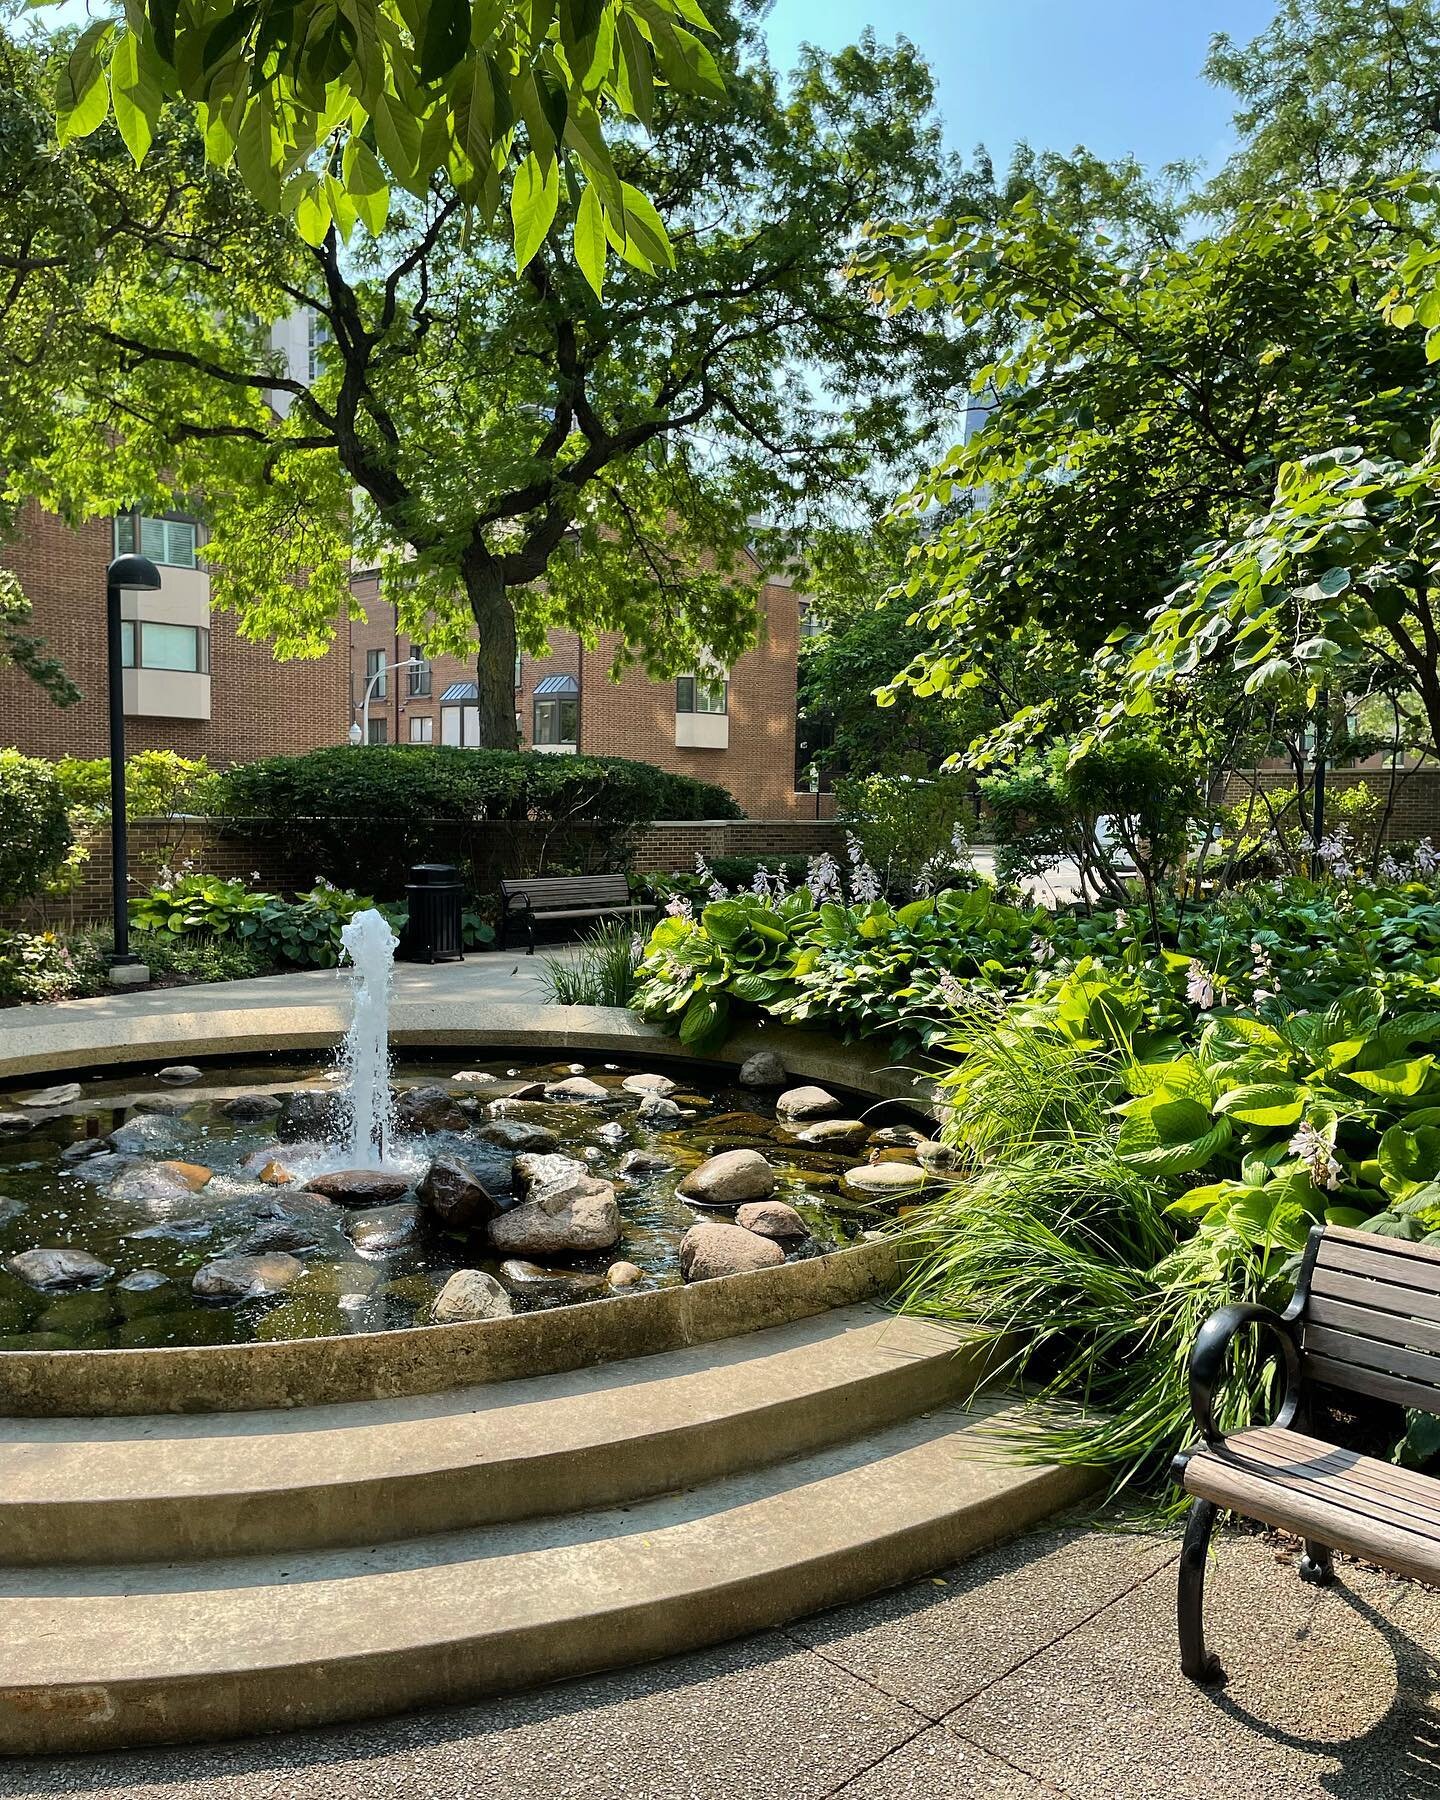 Our high-quality landscaping services are perfect for your city home. We work closely with property managers and condominium boards to achieve your landscaping dreams. 

#carlsandburg #carlsandburgvillage #chicagocondos #chicagoliving #cityscape #cit